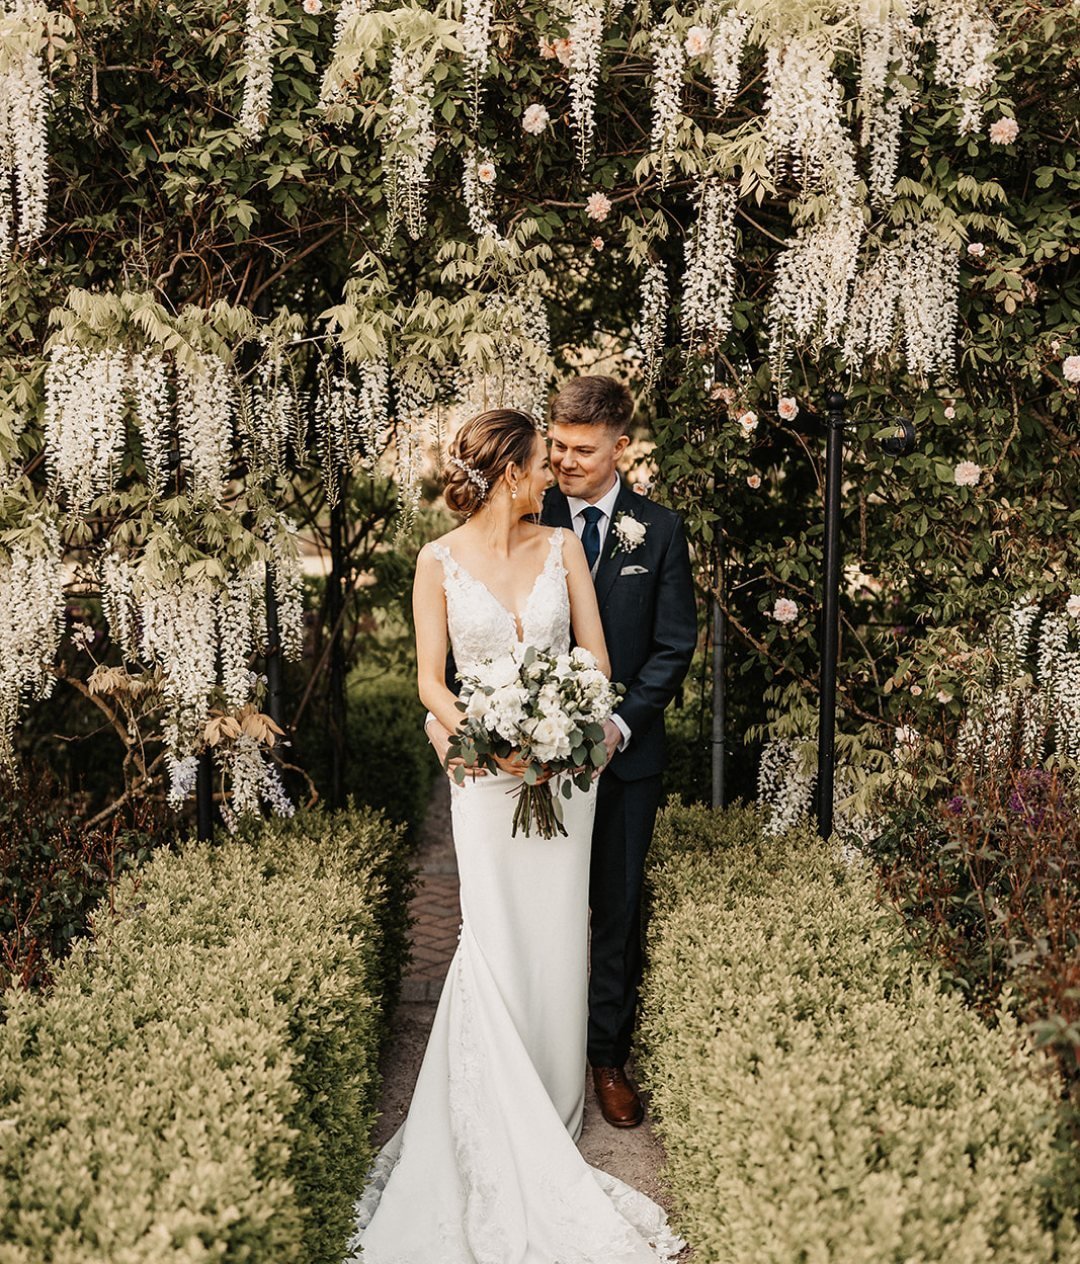 Wonderful Wisteria⁣
 ⁣
May signals the growth of the wonderful Wisteria aisle and pergola. 2 beautiful backdrops for your couple captures.⁣
 ⁣
The foliage is growing and the flowers are due to bloom in the coming weeks, we can&rsquo;t wait to see you